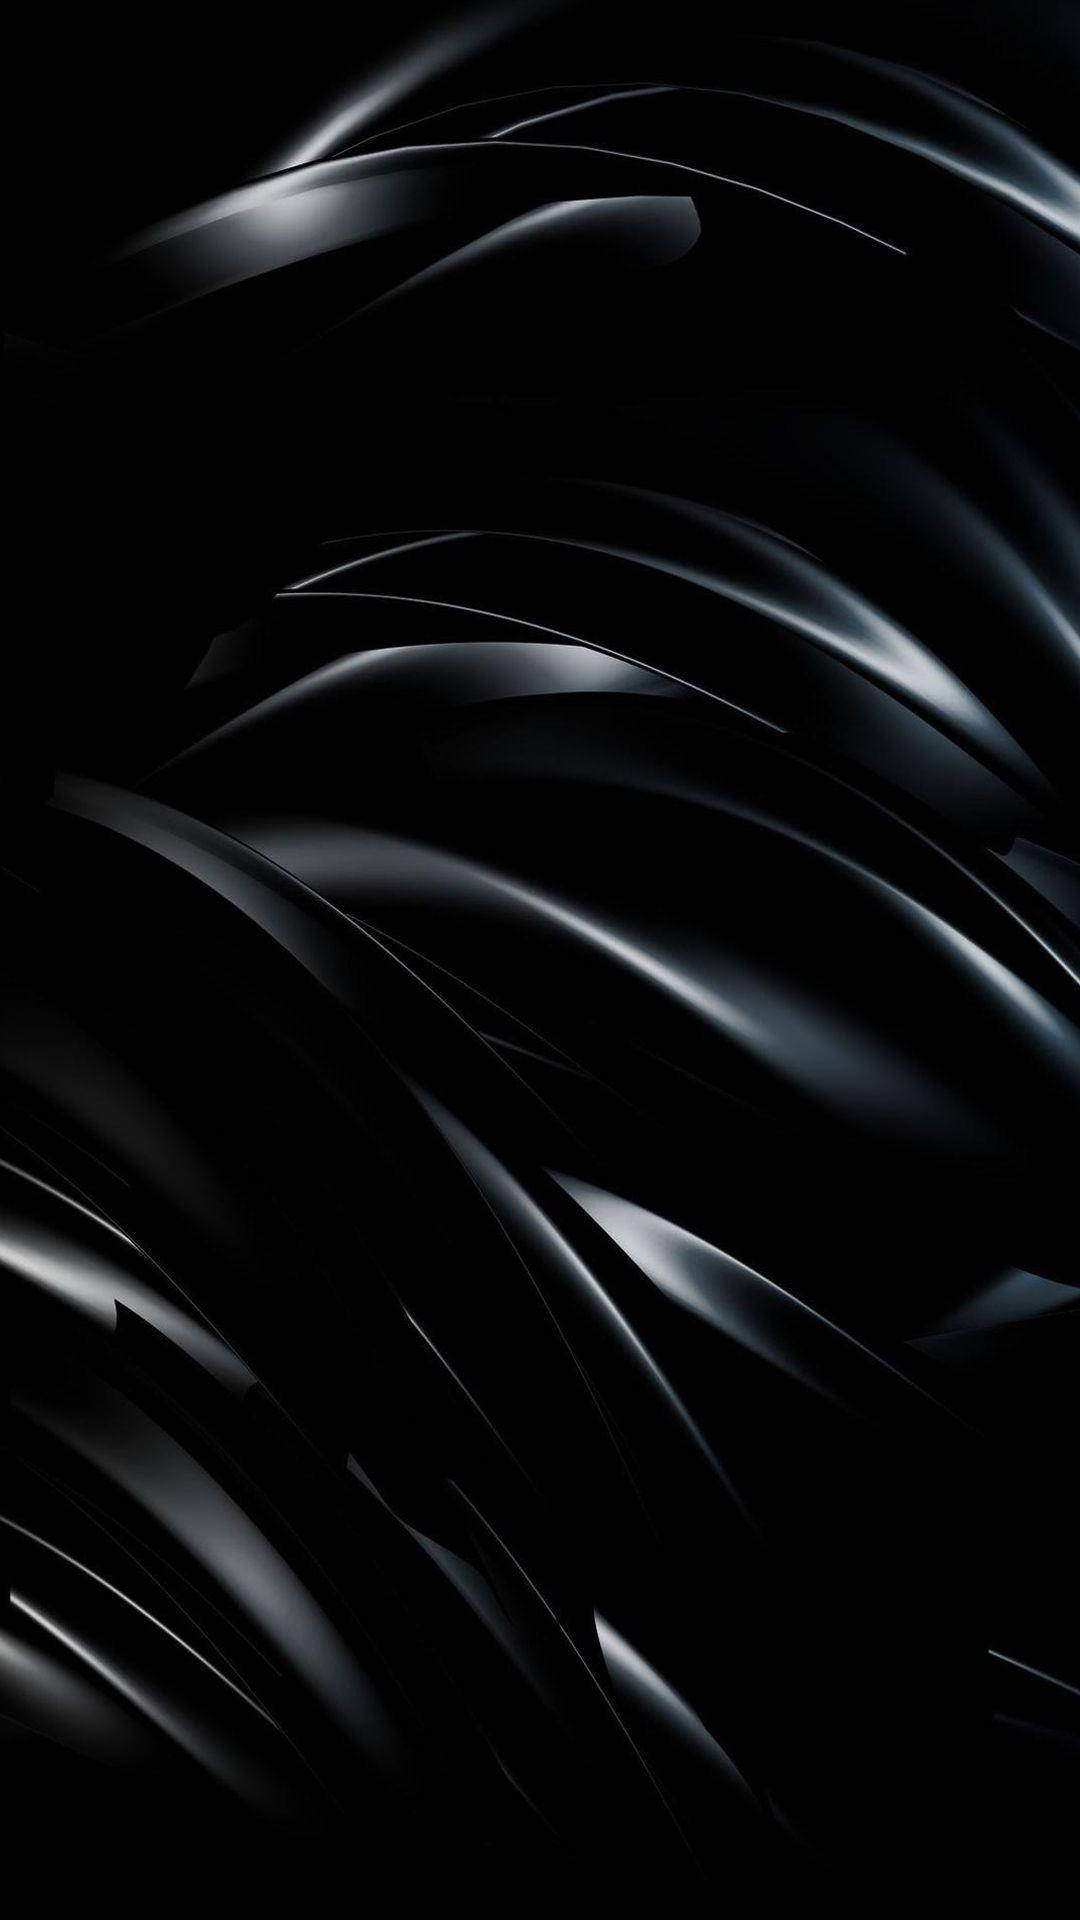 Metal-like Abstract Coils Iphone 8 Live Background